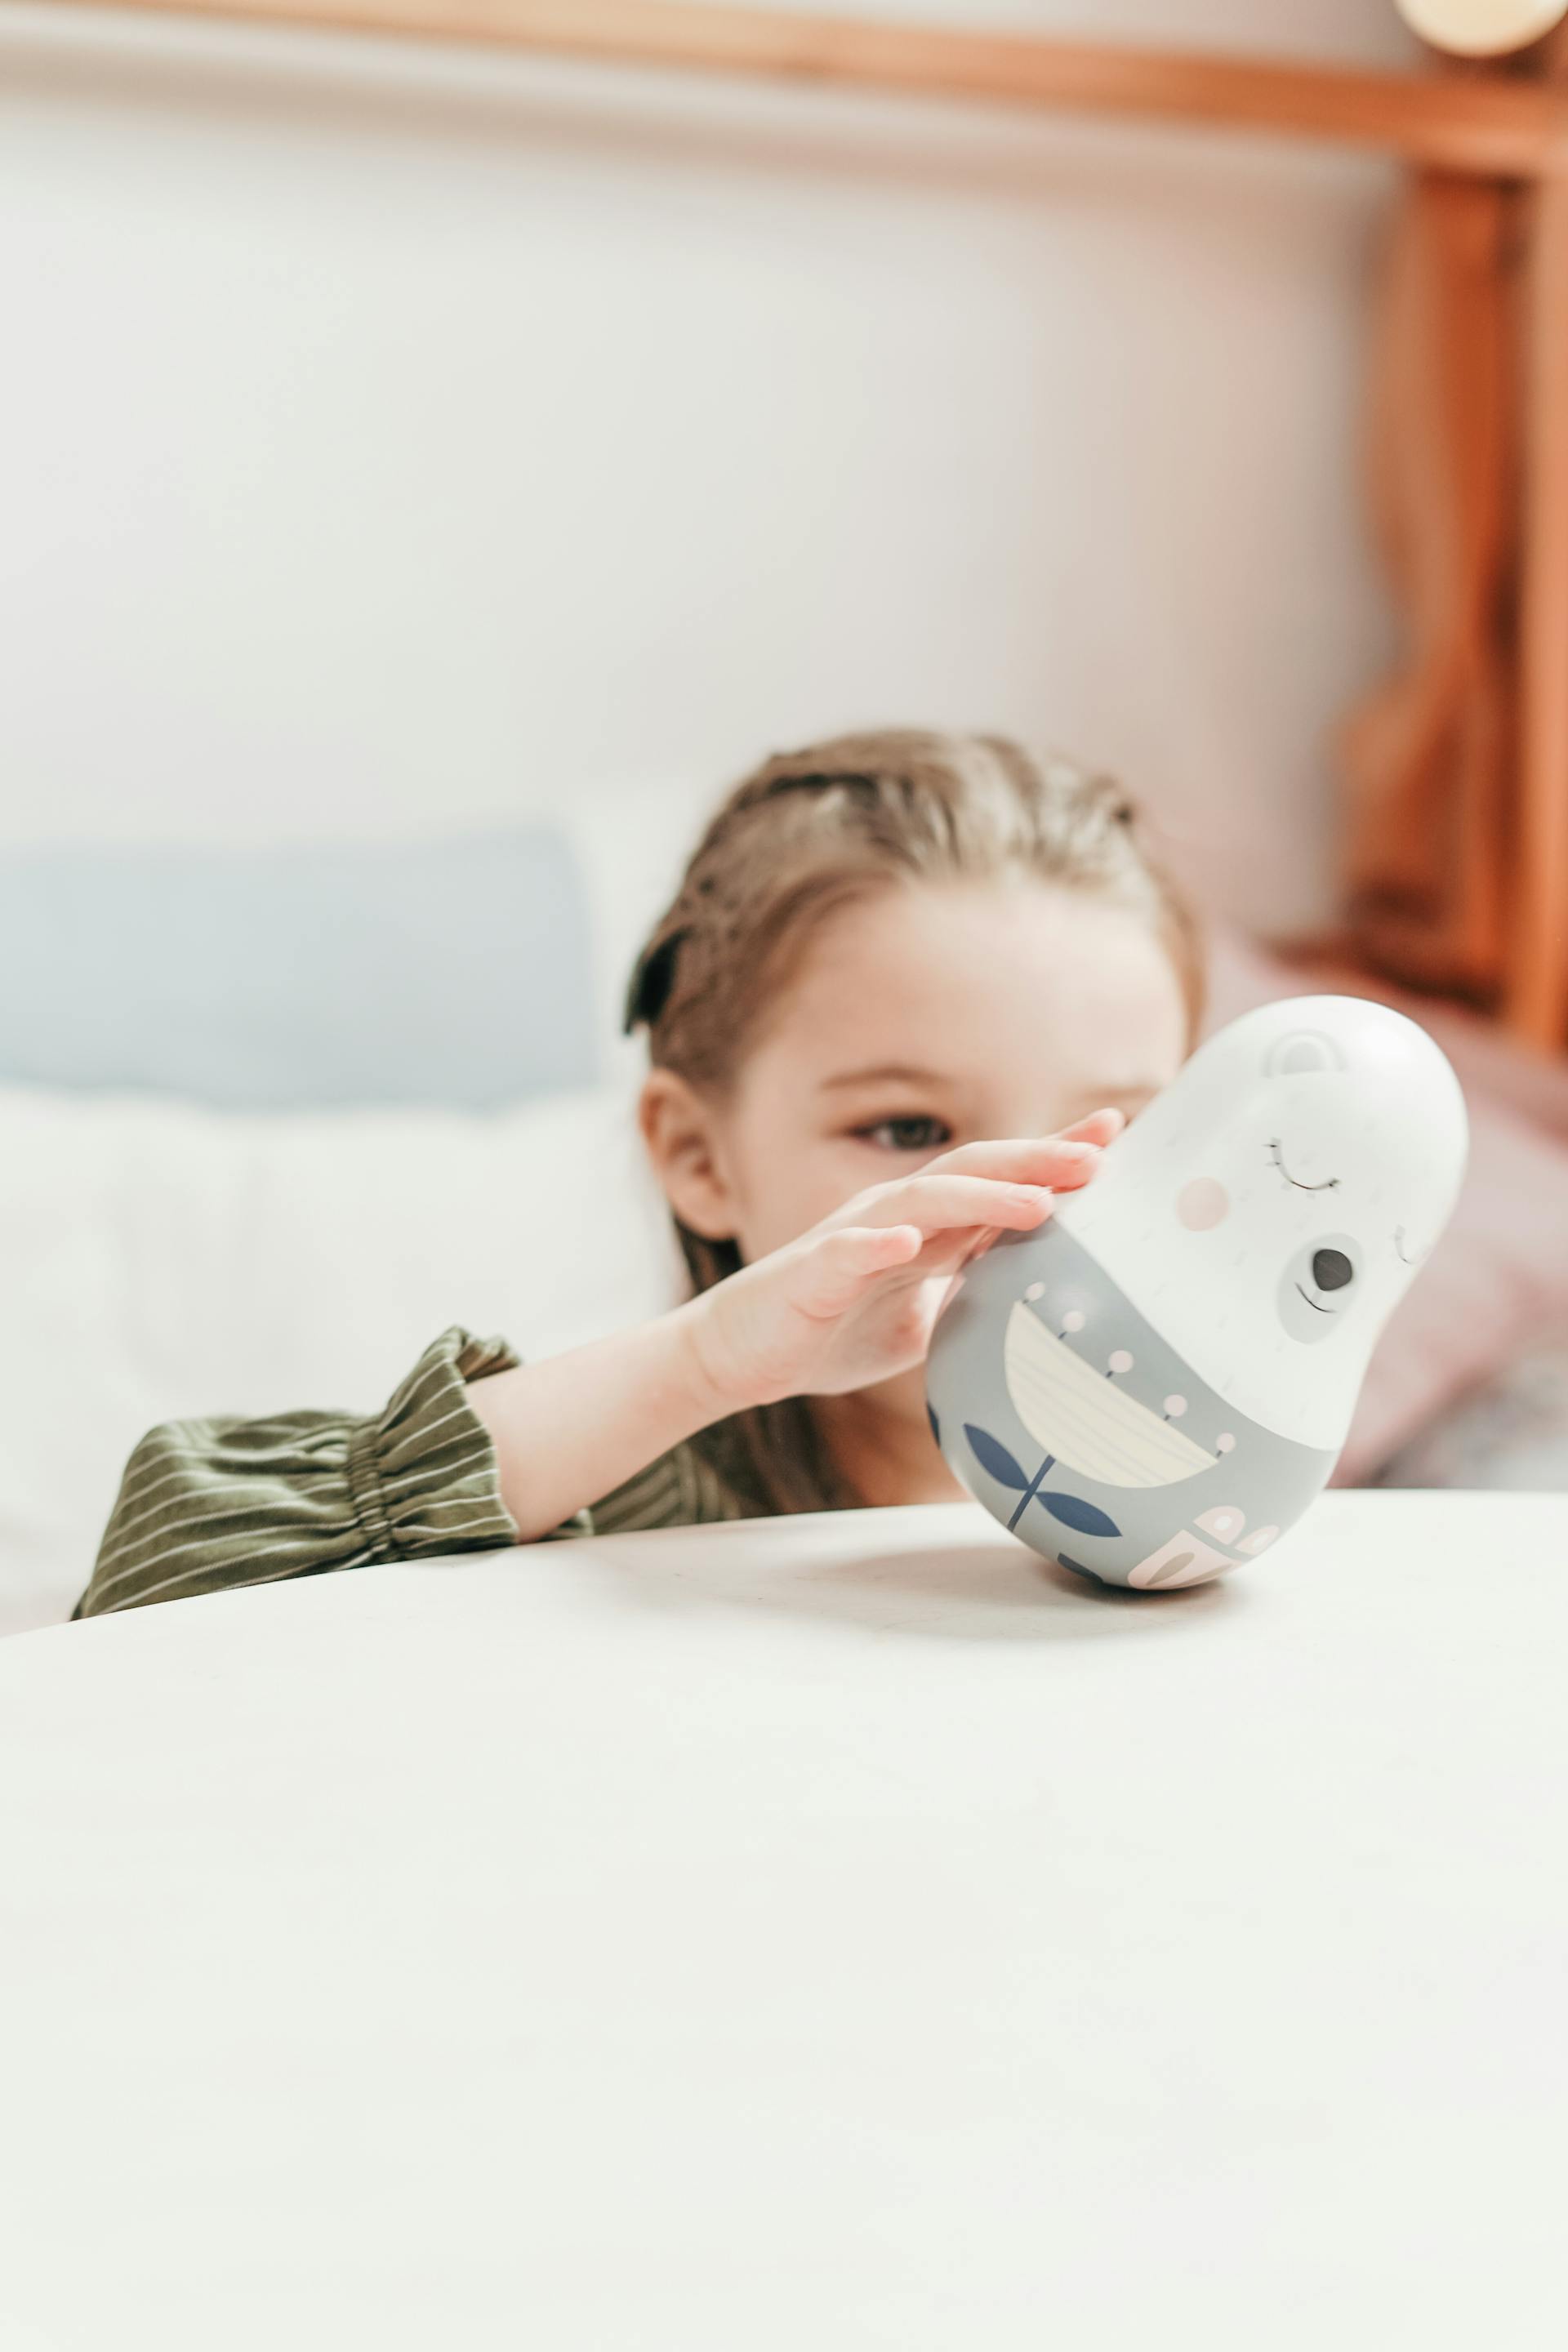 A little girl playing with a plush toy | Source: Pexels